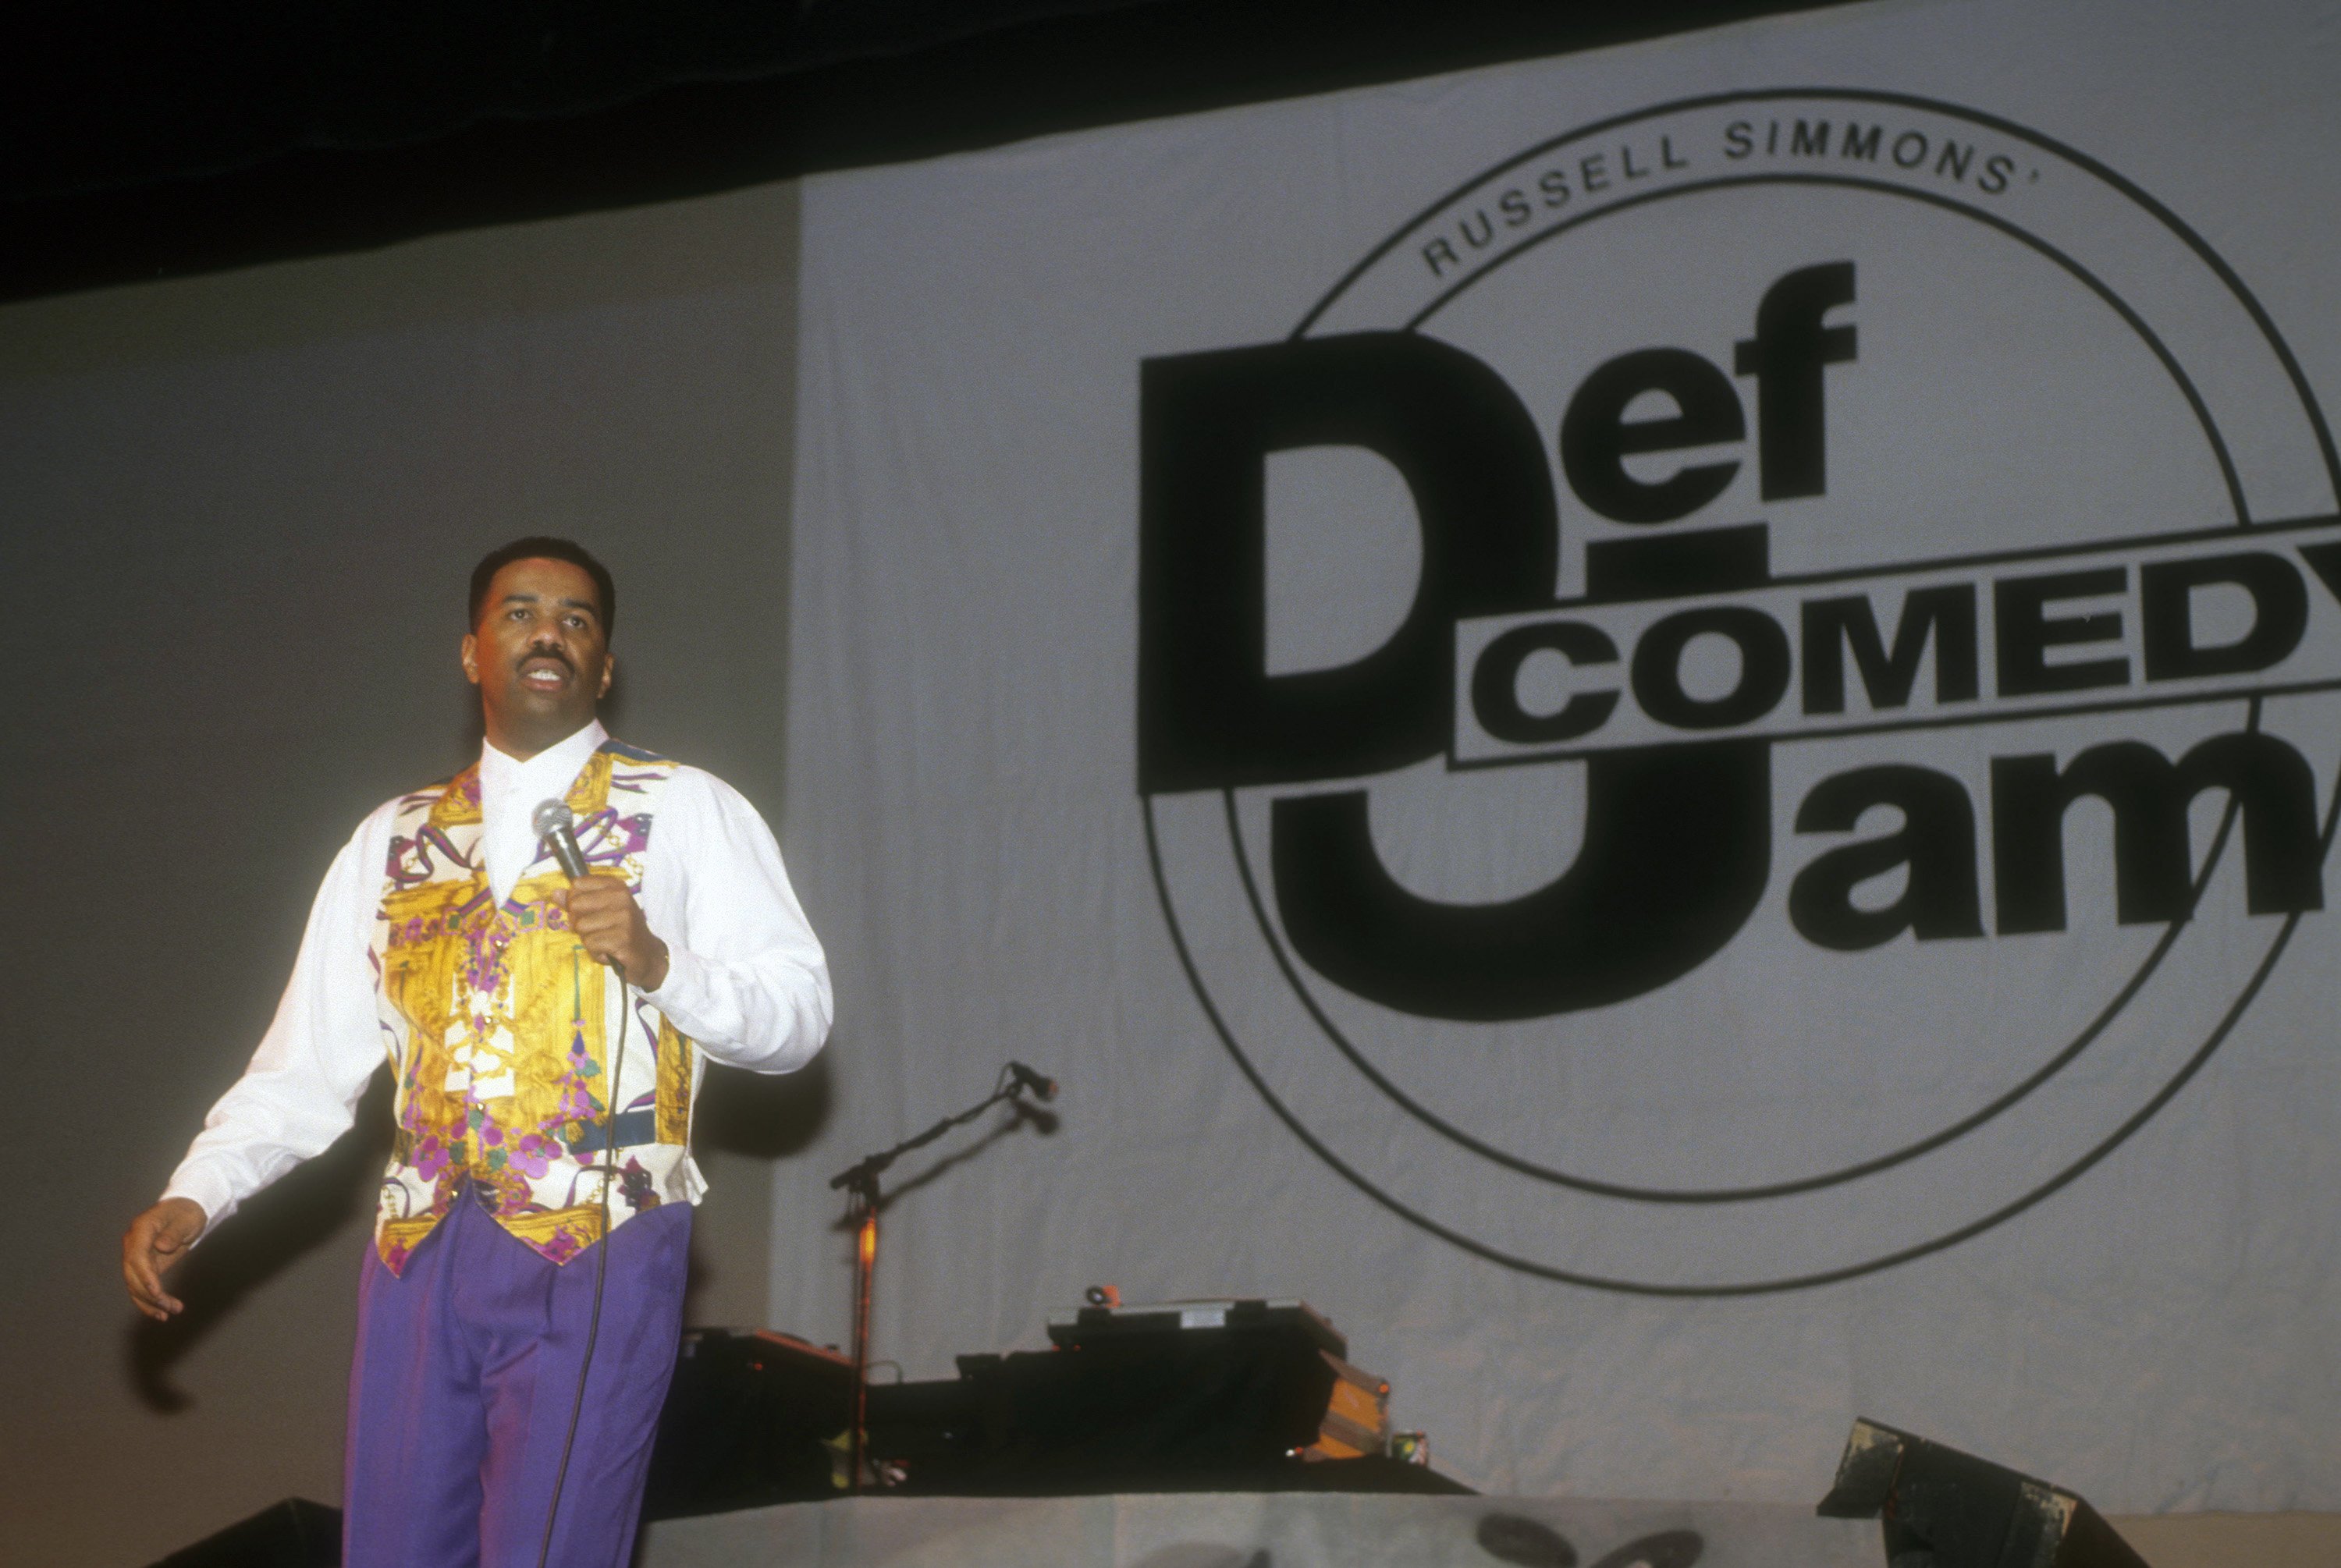 Comedian Steve Harvey performs at Russell Simmons' Def Comedy Jam on June 10, 1993 in New York City. ┃Source: Getty Images